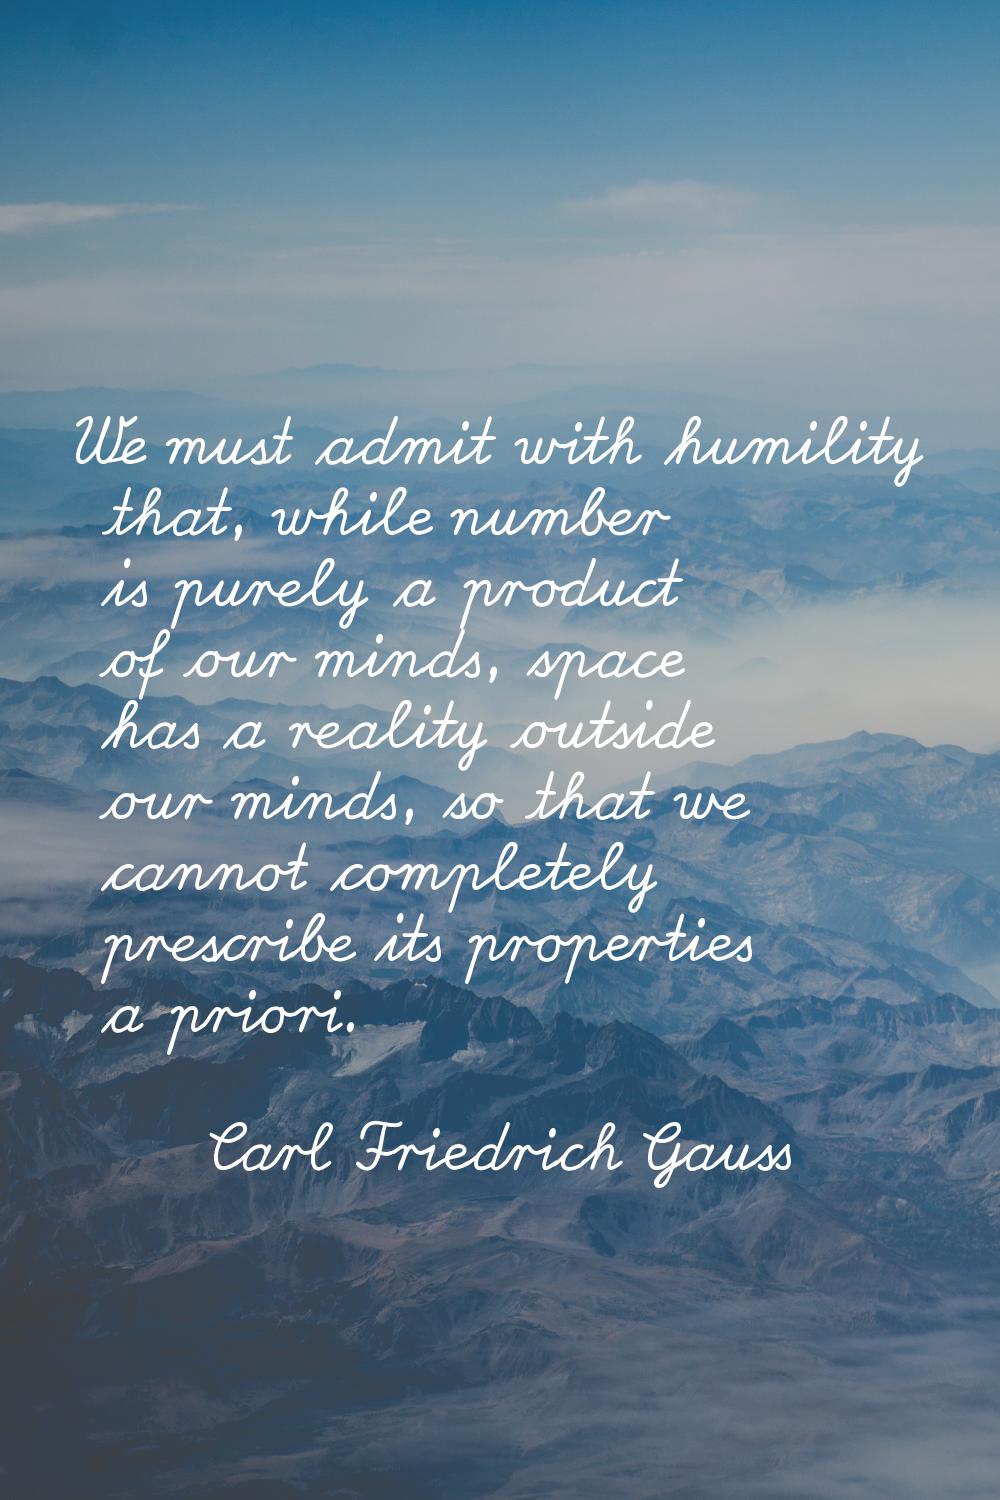 We must admit with humility that, while number is purely a product of our minds, space has a realit